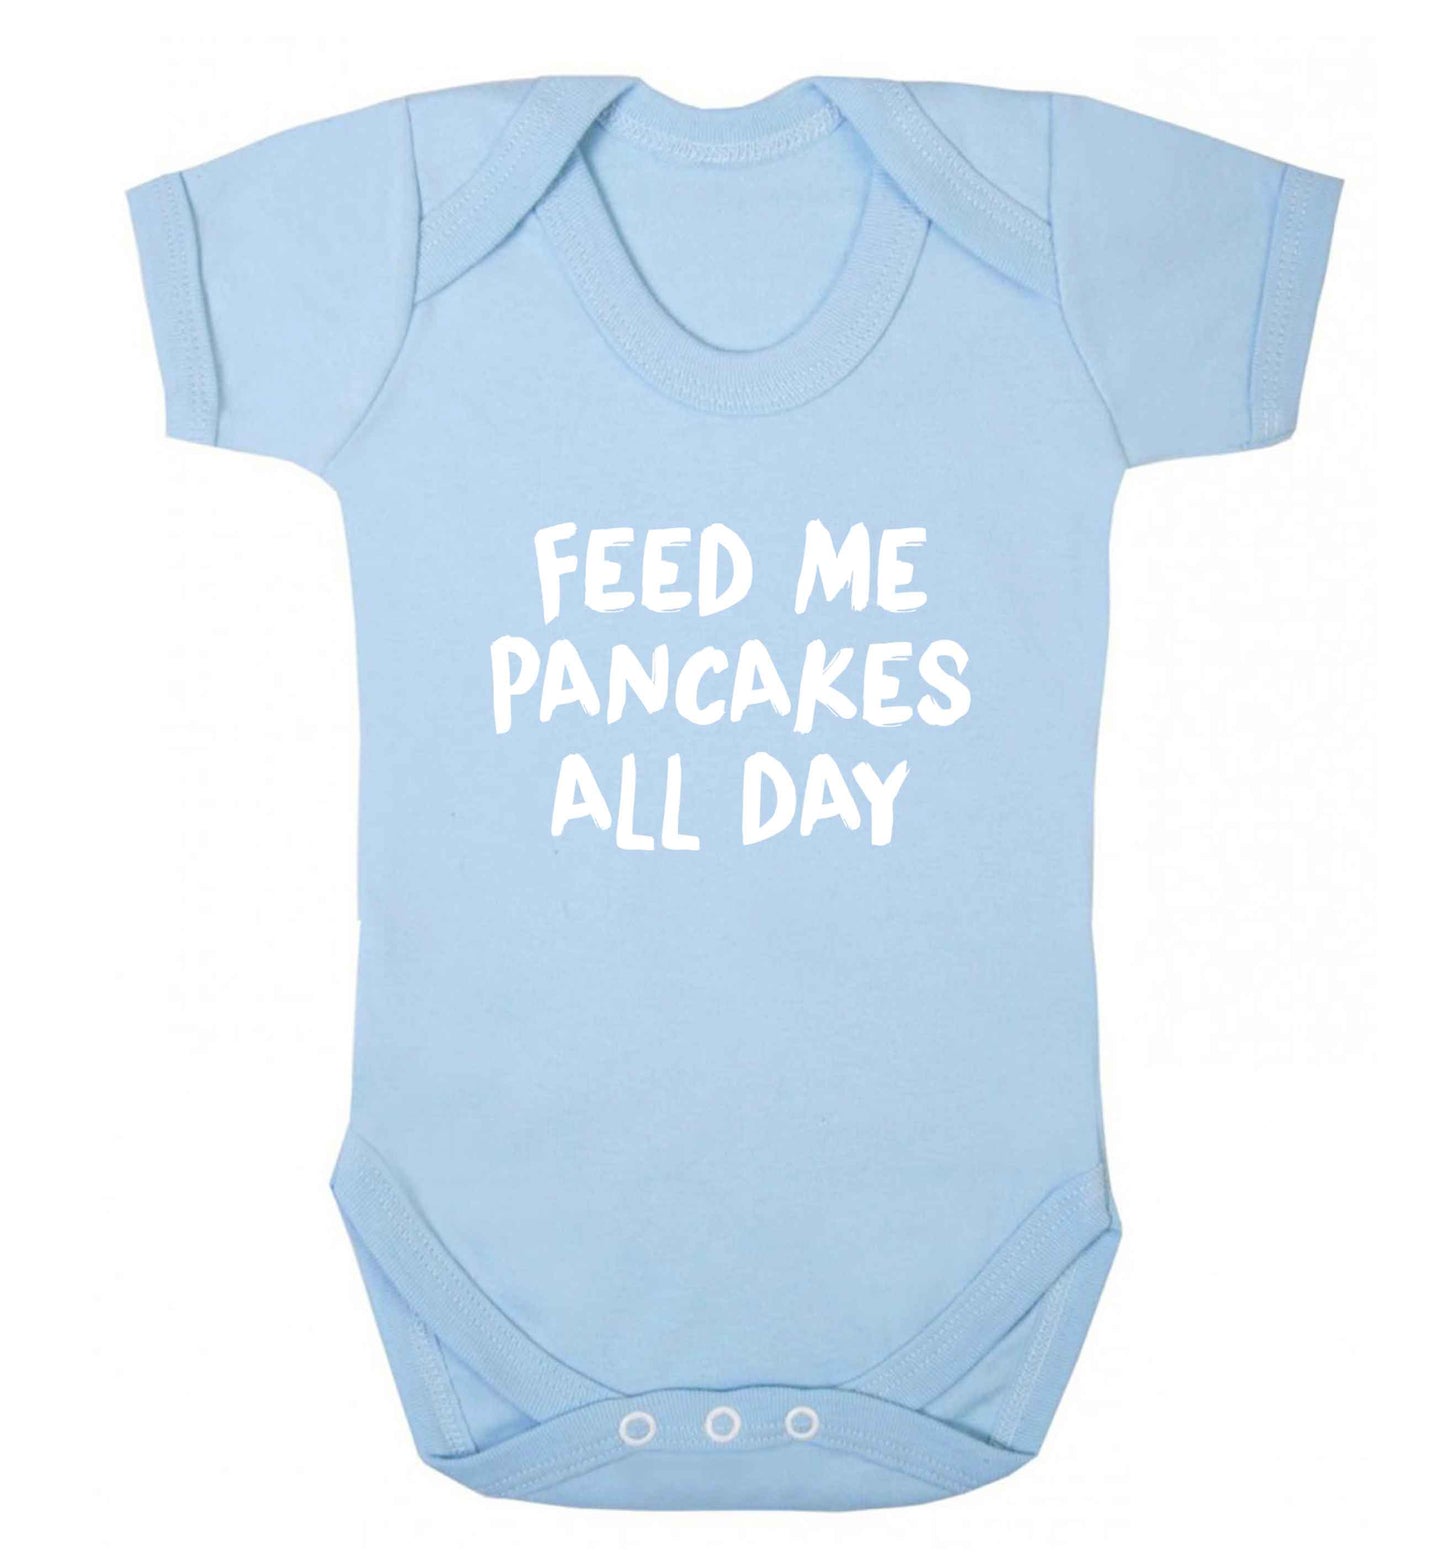 Feed me pancakes all day baby vest pale blue 18-24 months